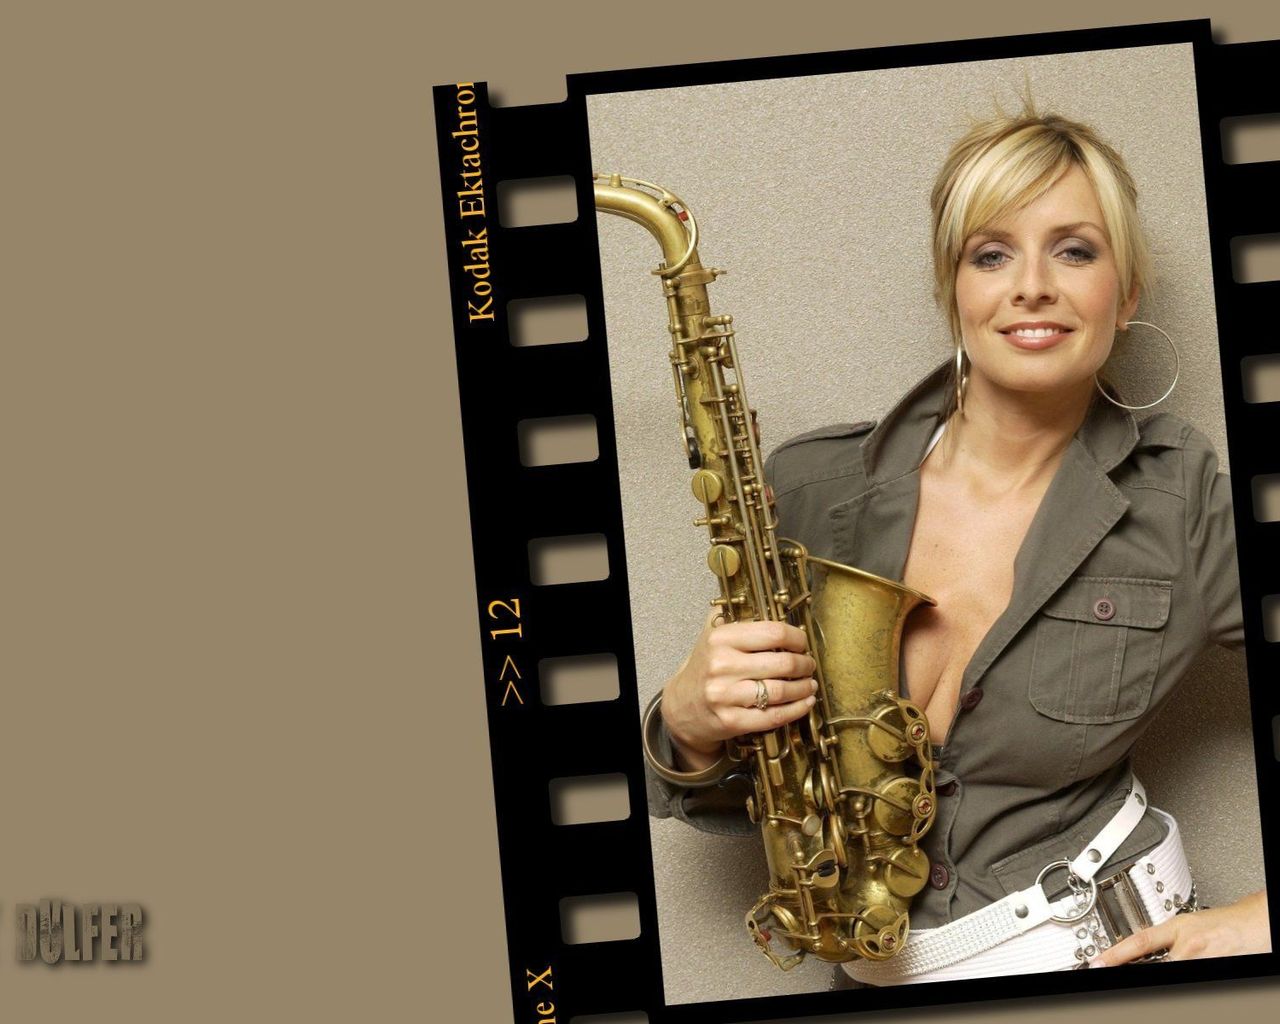 Candy Dulfer Wallpapers